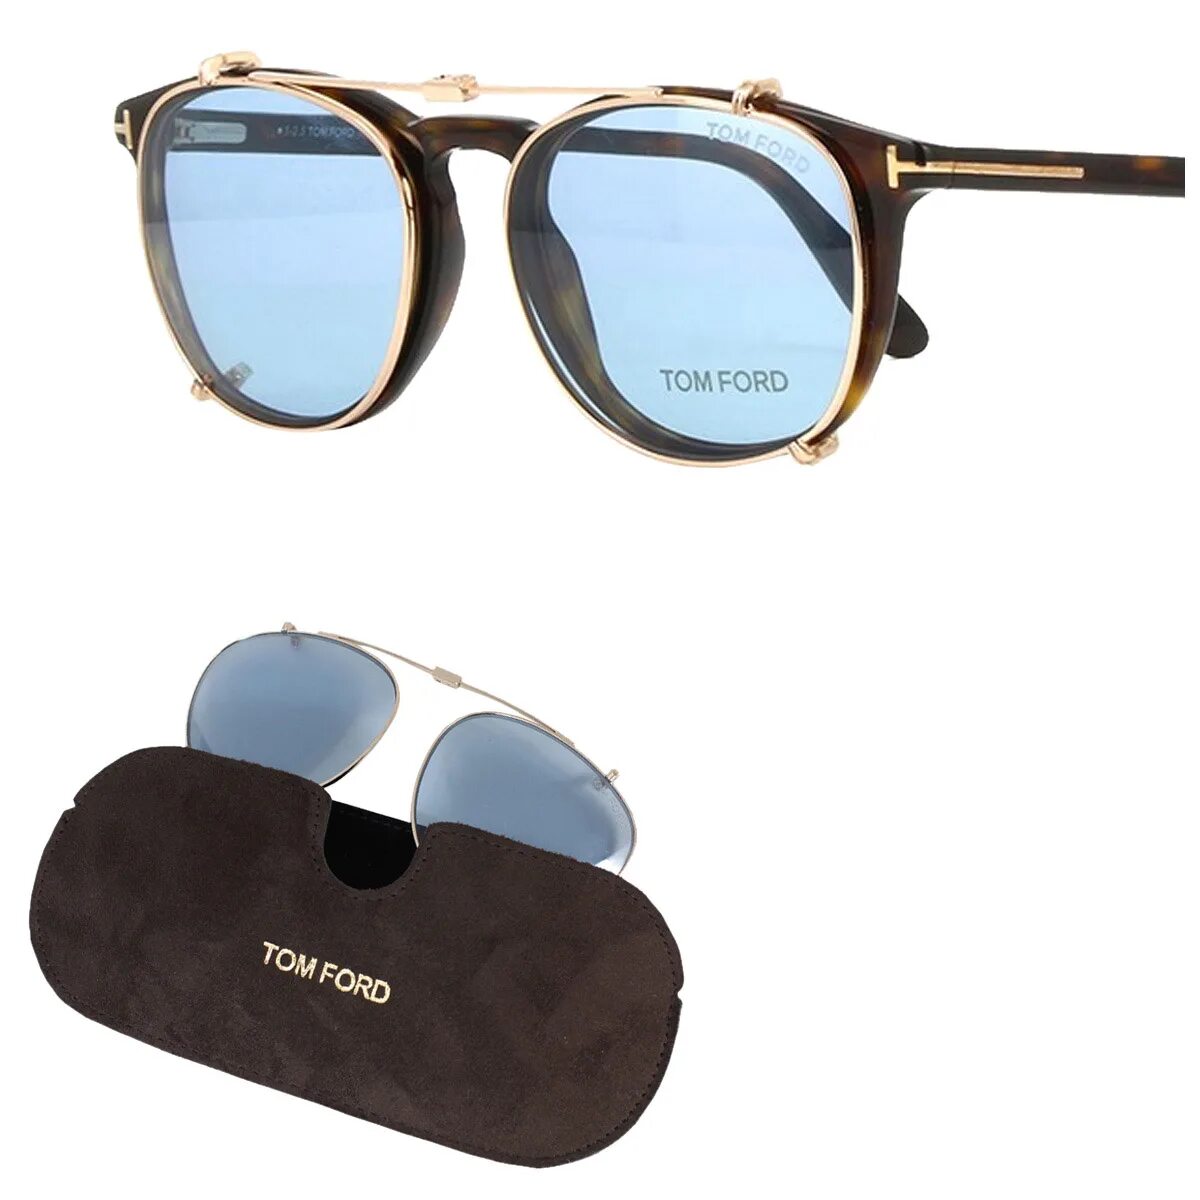 Tom Ford 5294. Очки Tom Ford 2022. Tom Ford ft5294. Очки Tom Ford tf3518.